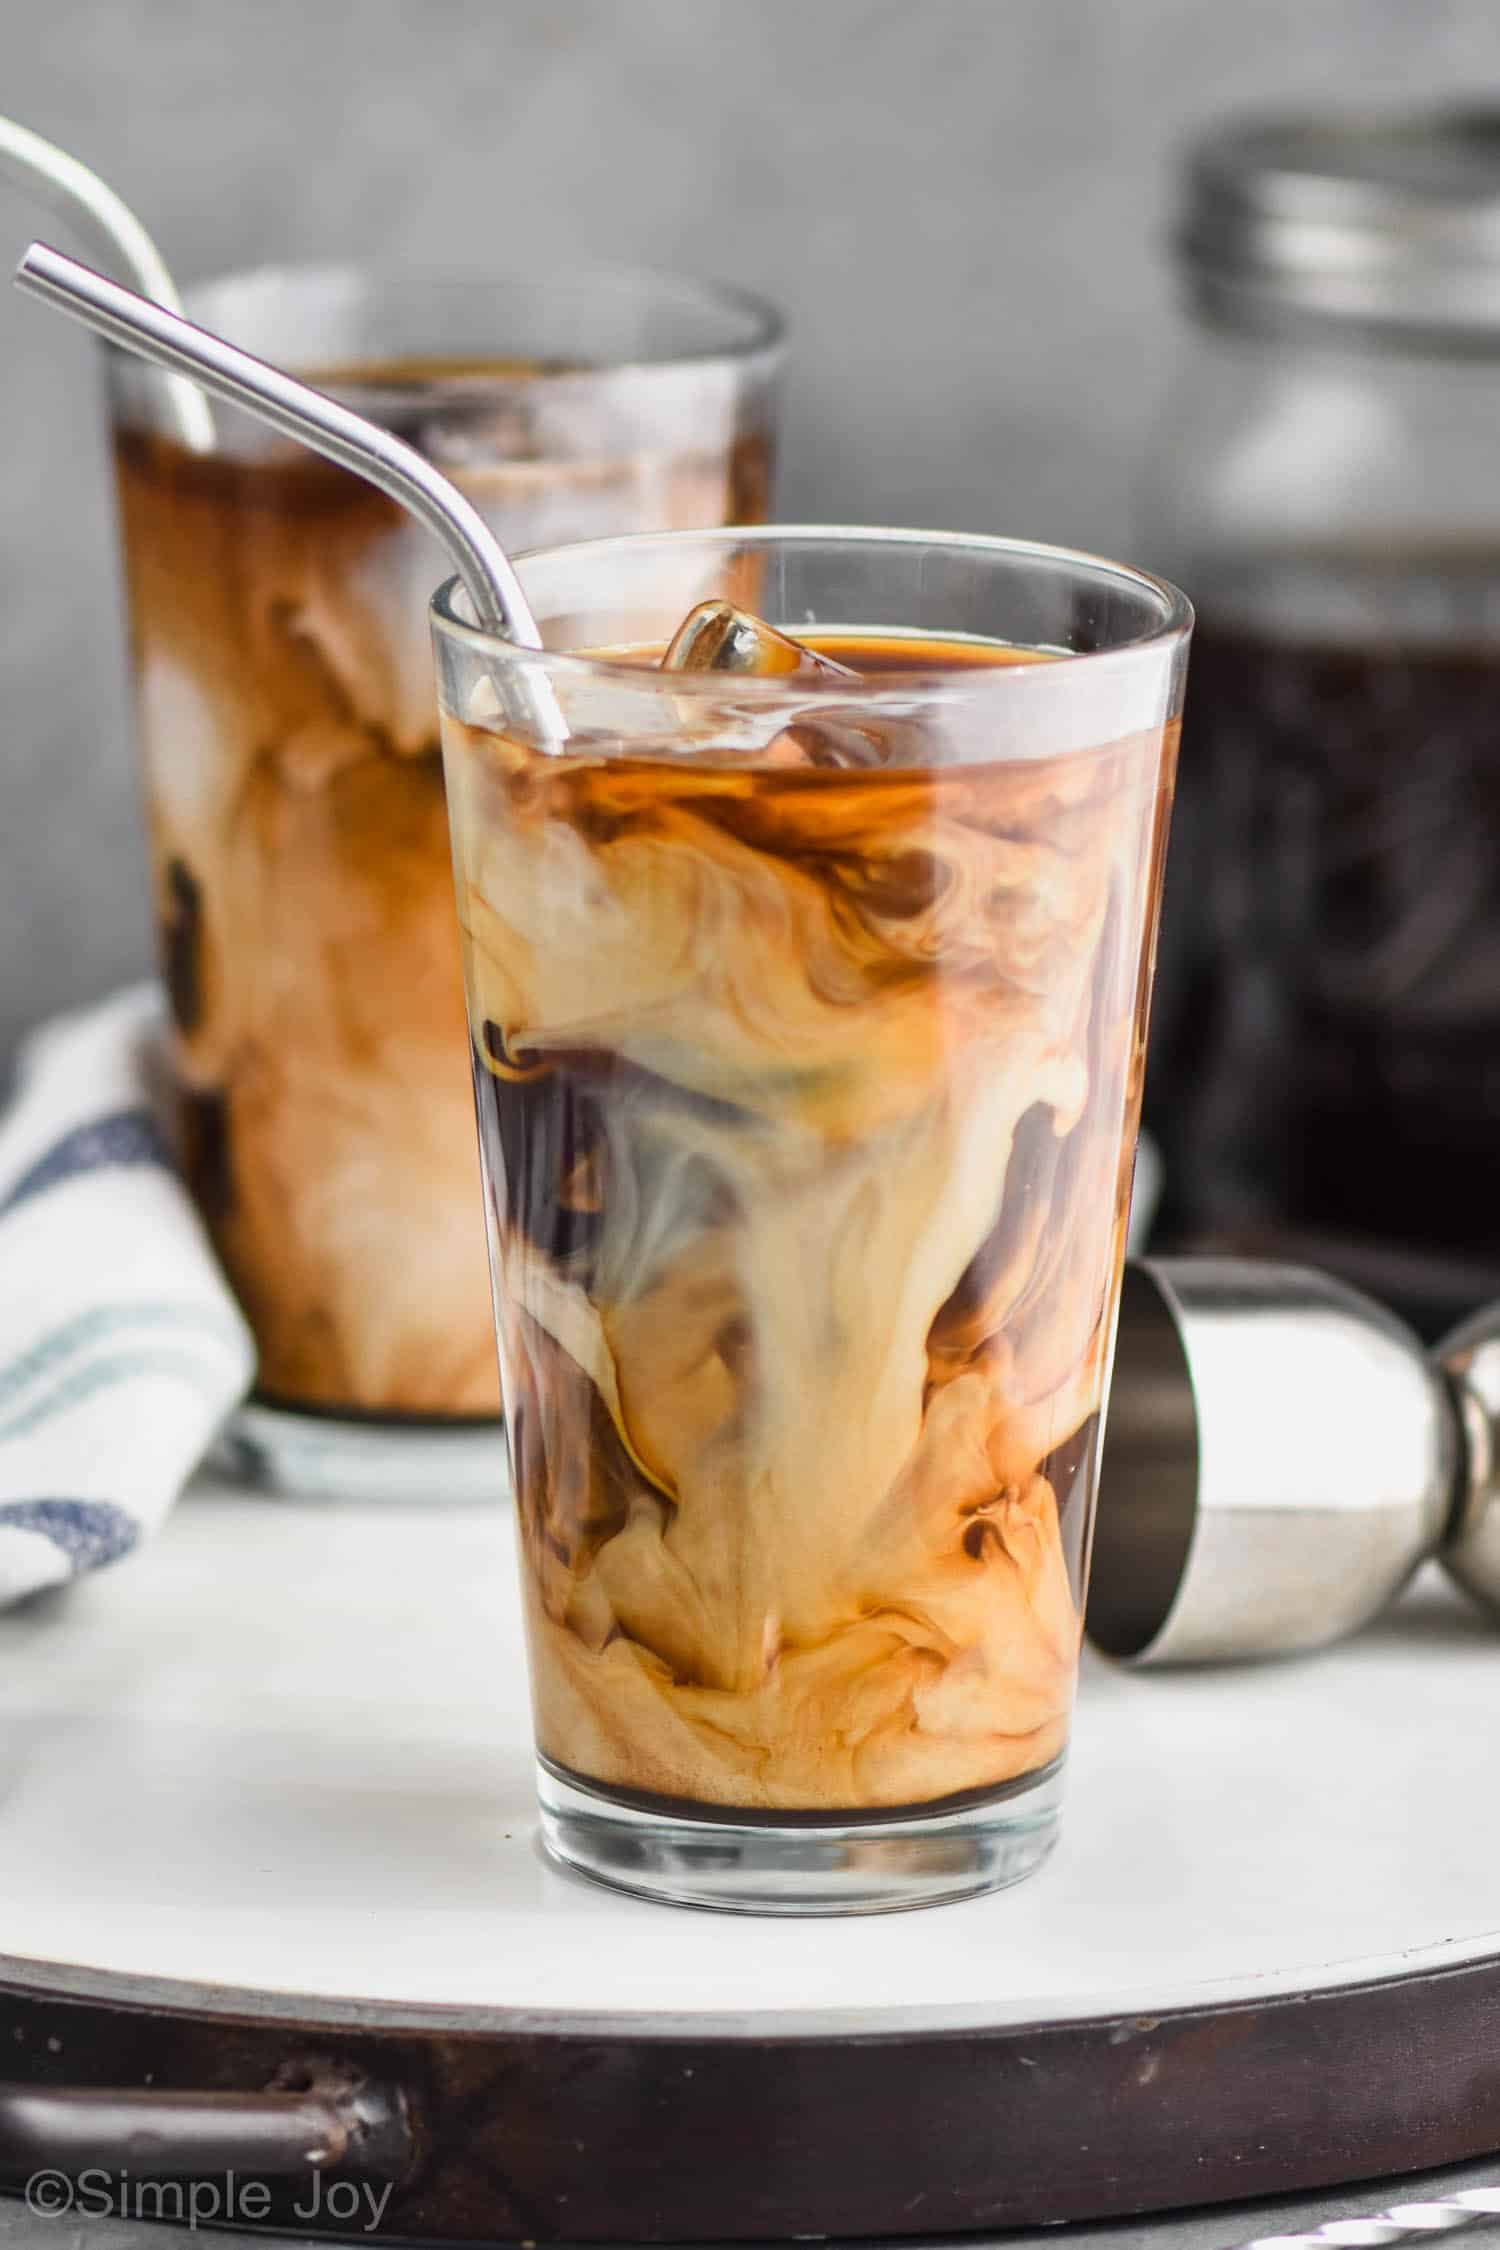 This Is How Much Coffee Is In Iced Coffee